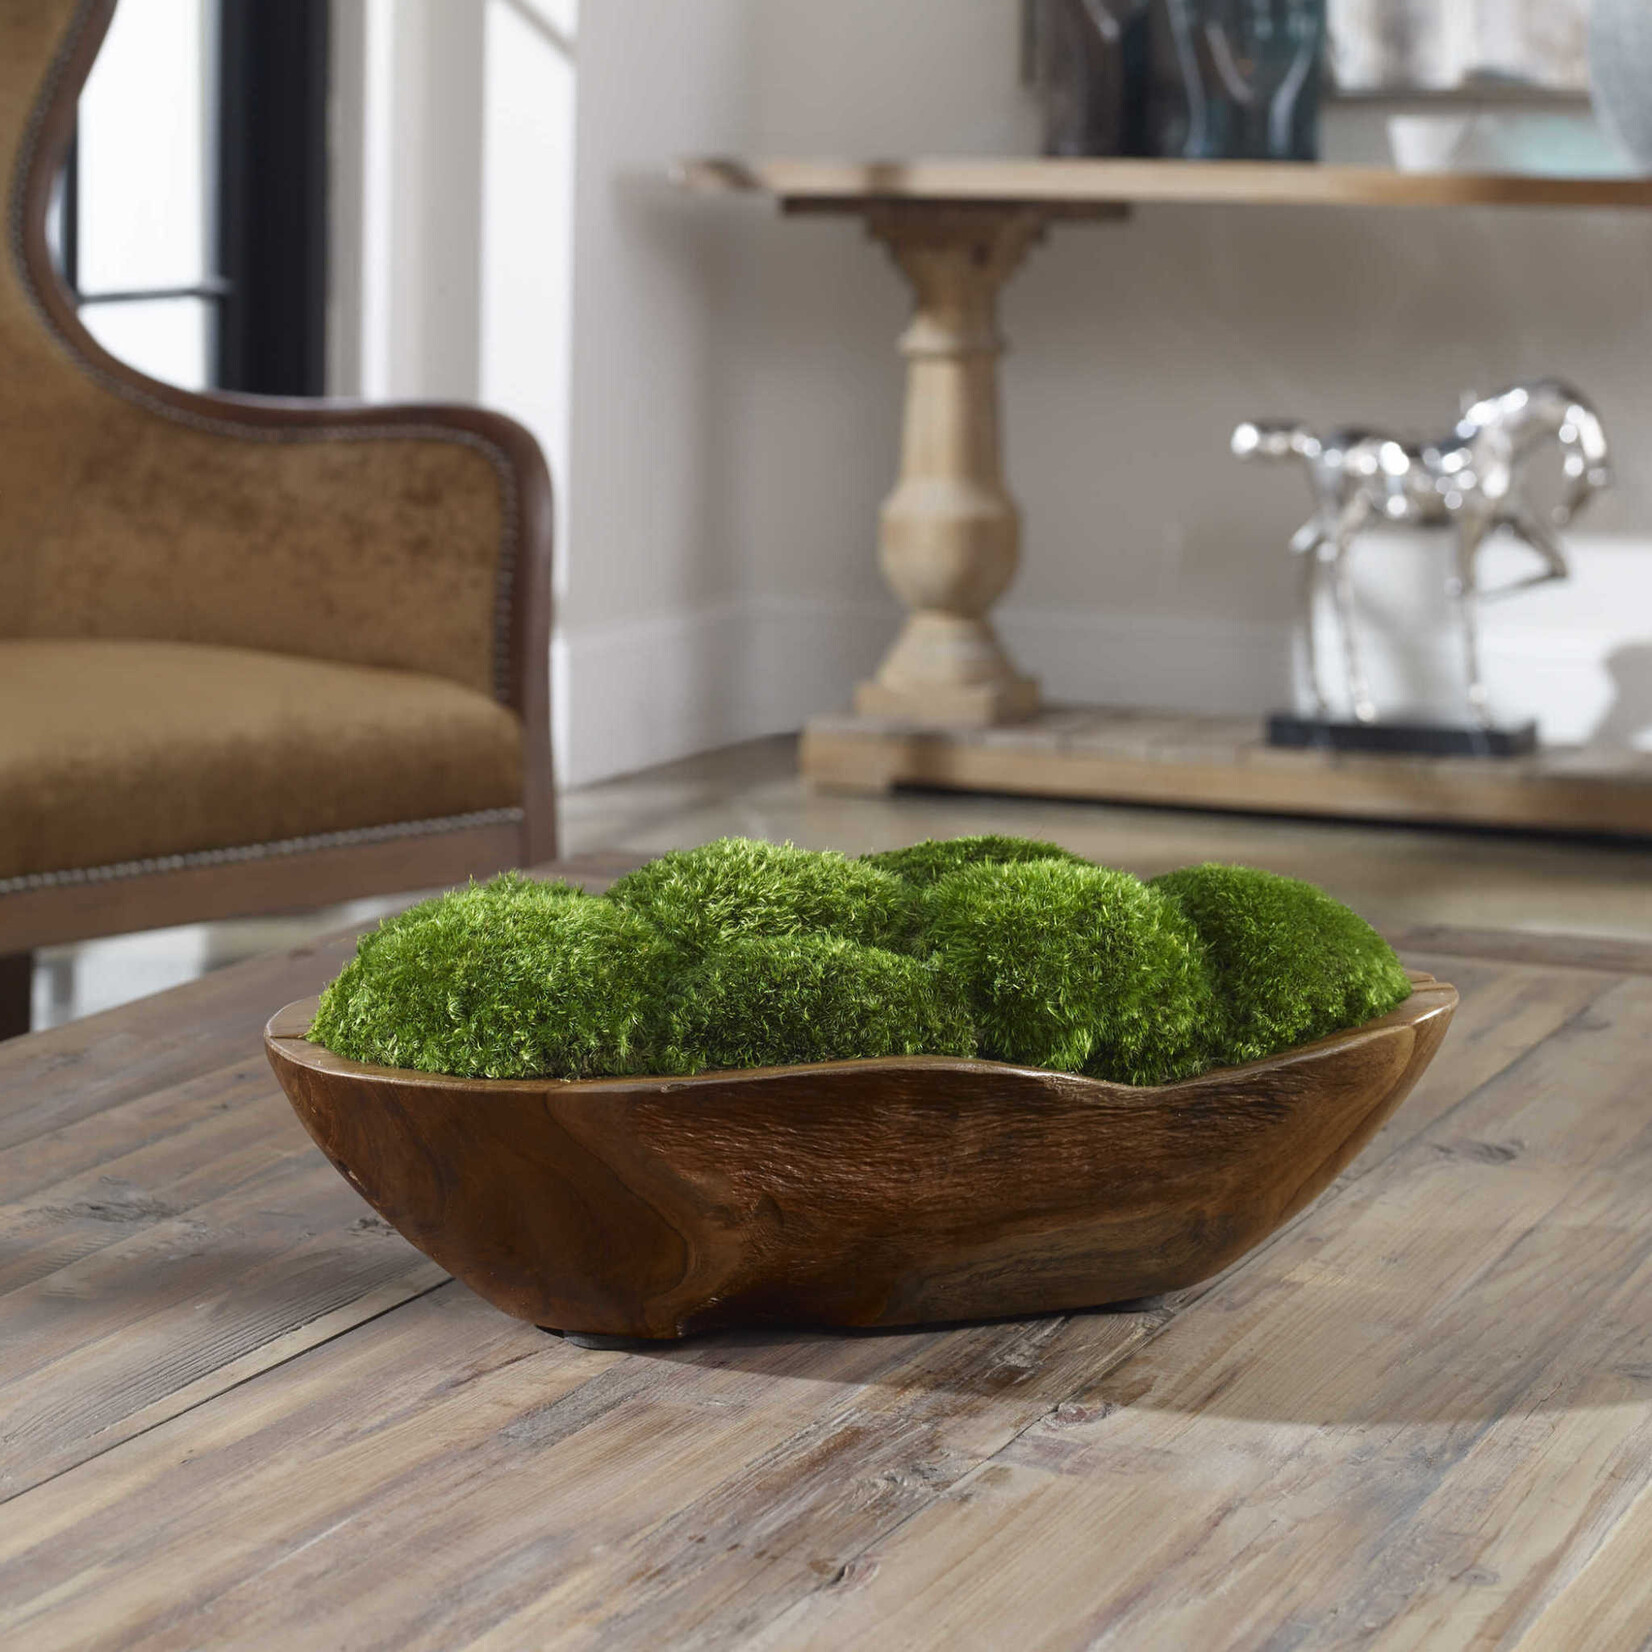 Outside The Box 19" Kinsale Preserved Moss In Natural Teak Wood Bowl